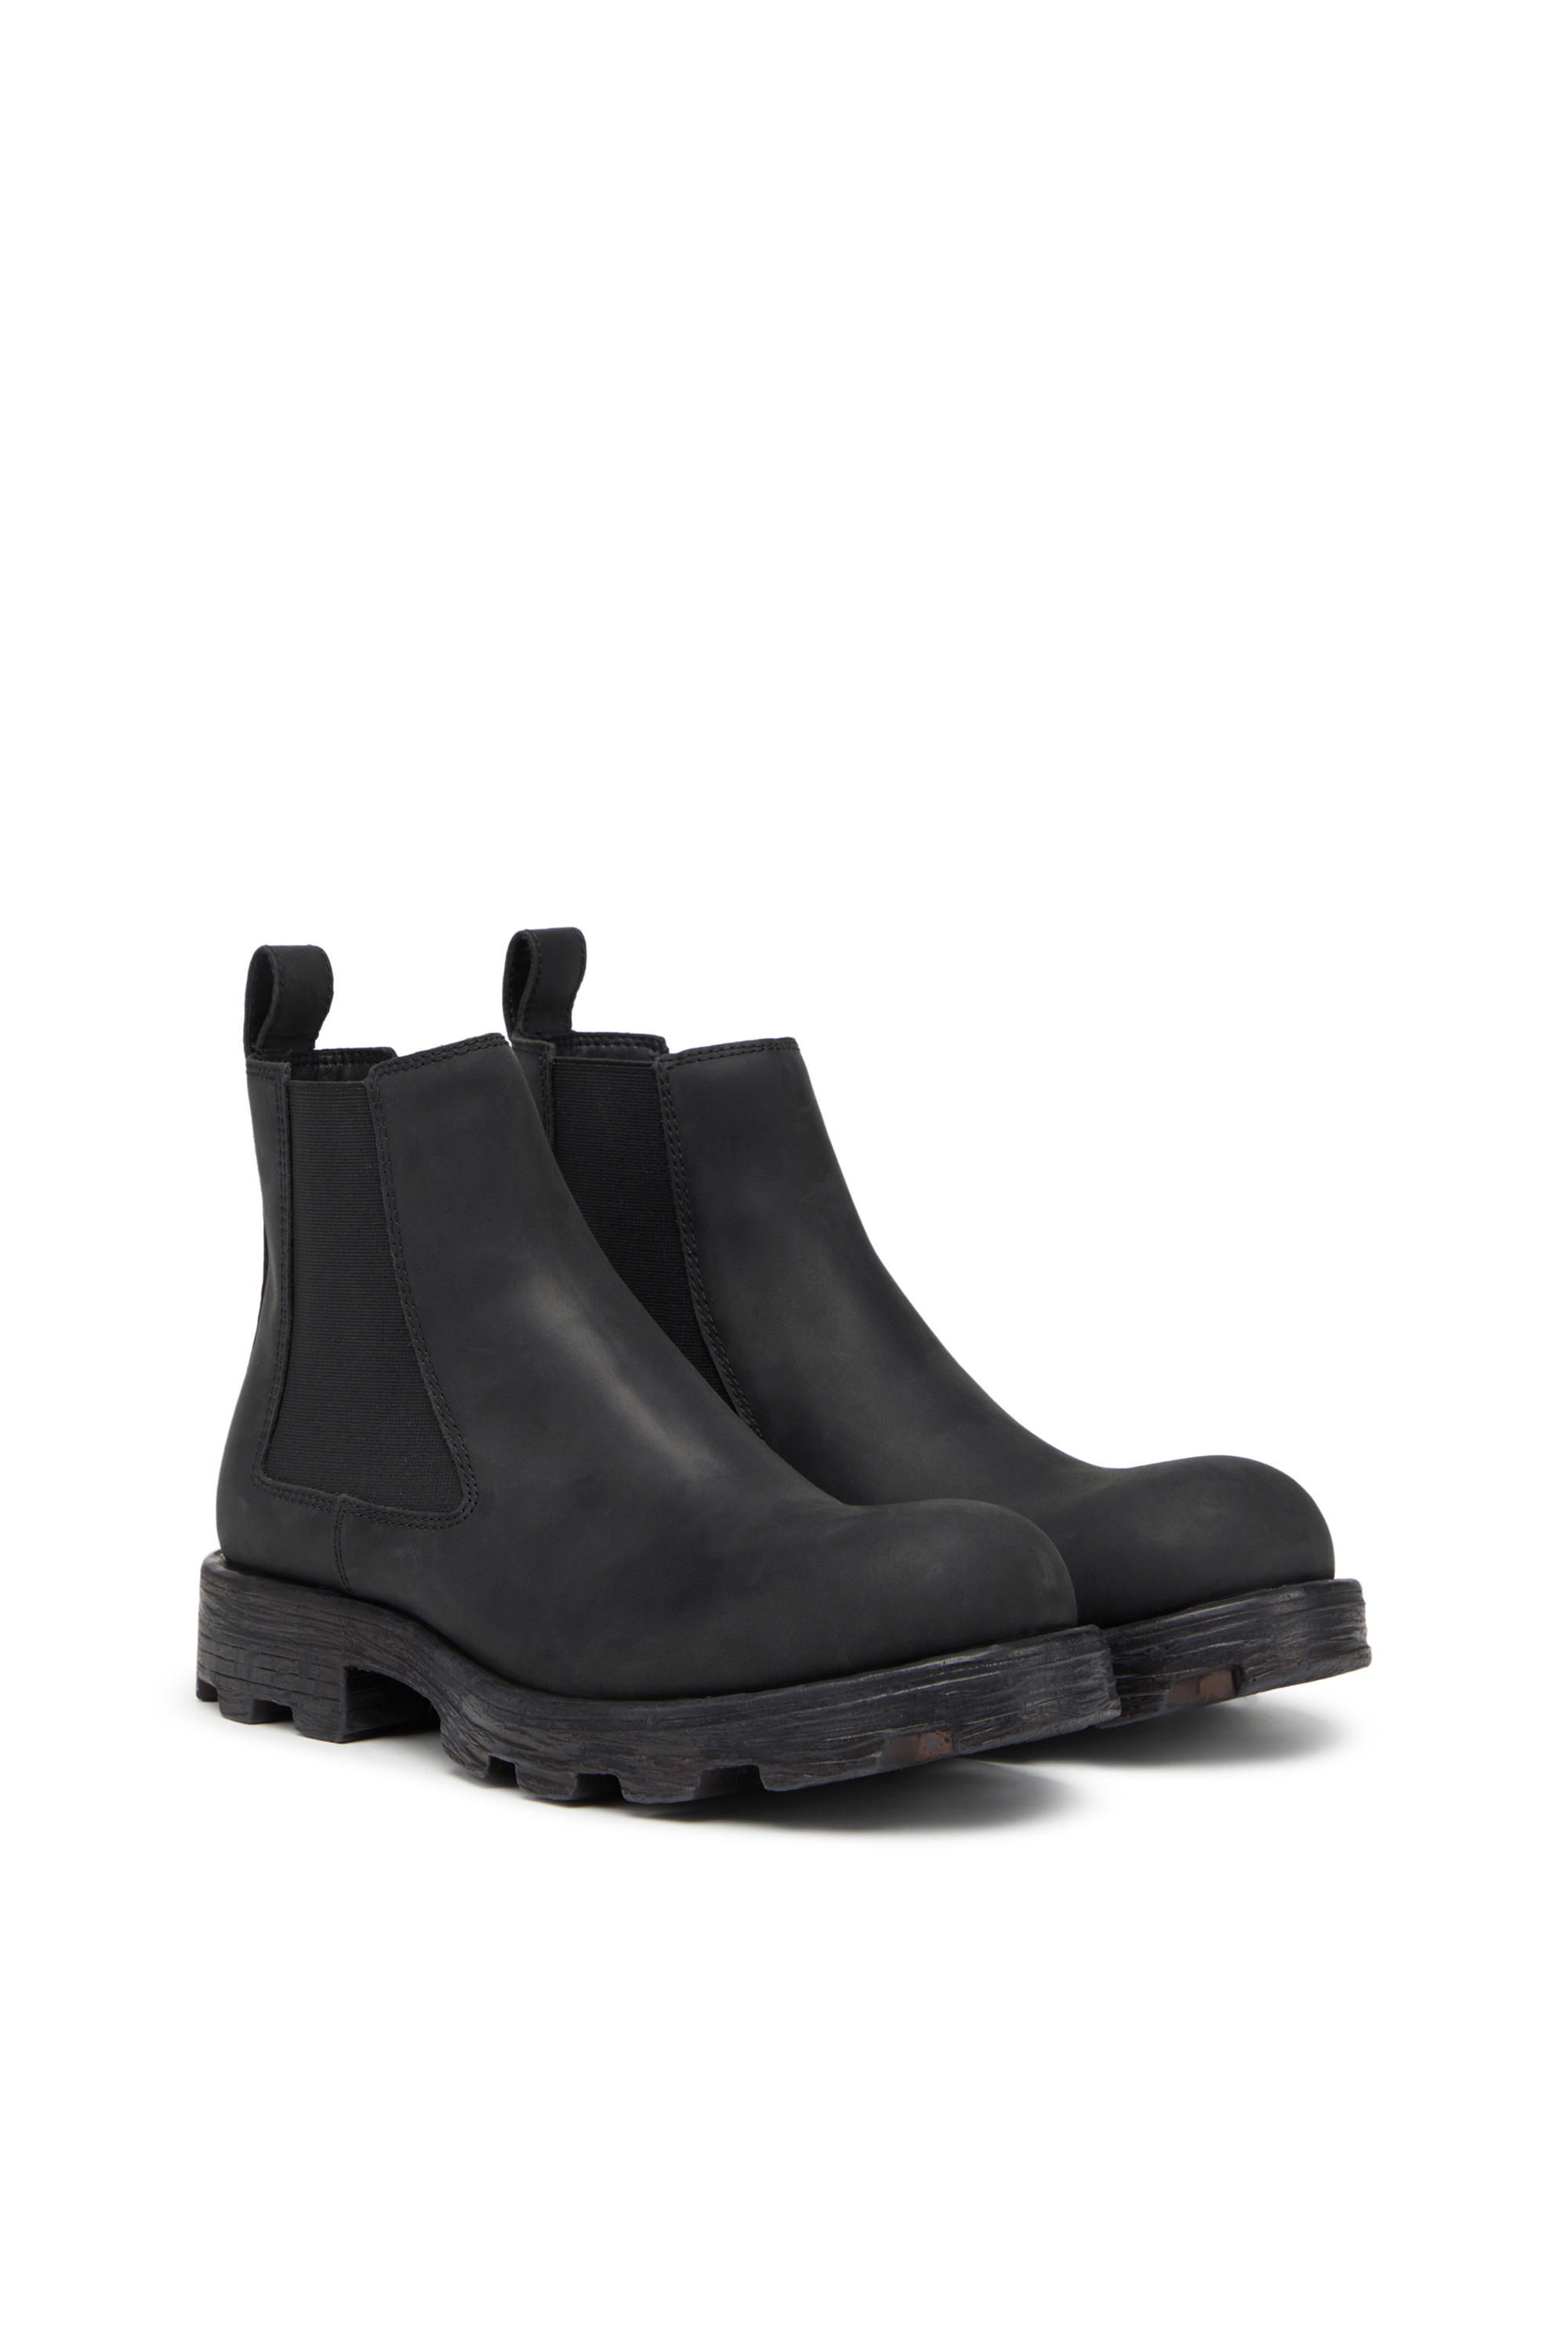 Diesel - D-HAMMER LCH, Man D-Hammer LCH - Chelsea boots in waxed nubuck leather in Black - Image 2